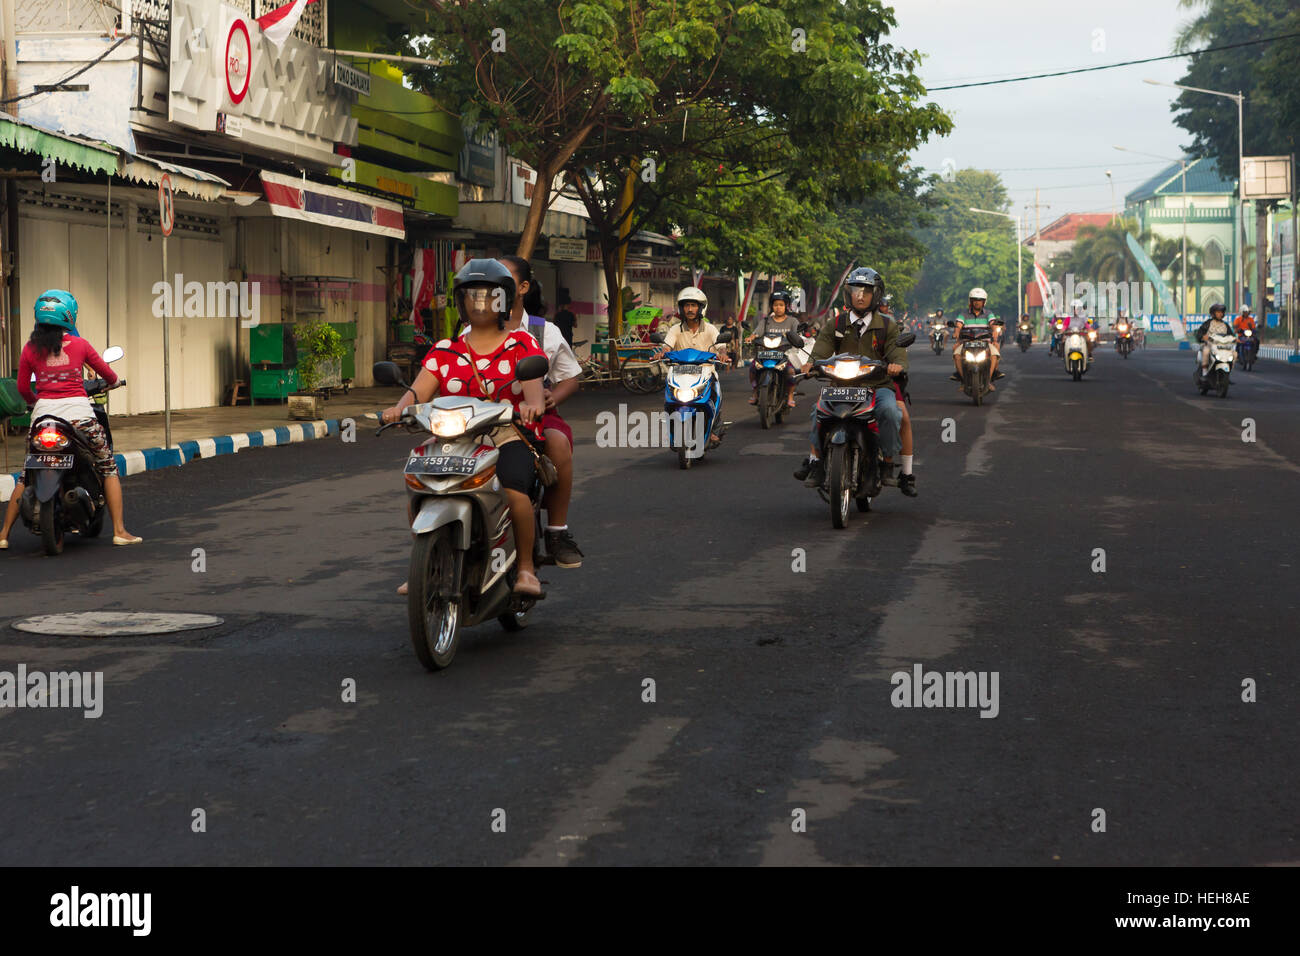 Motorcycle is one of the most important transport vehicle in Indonesia. Most people use motorbike in daily life. Stock Photo